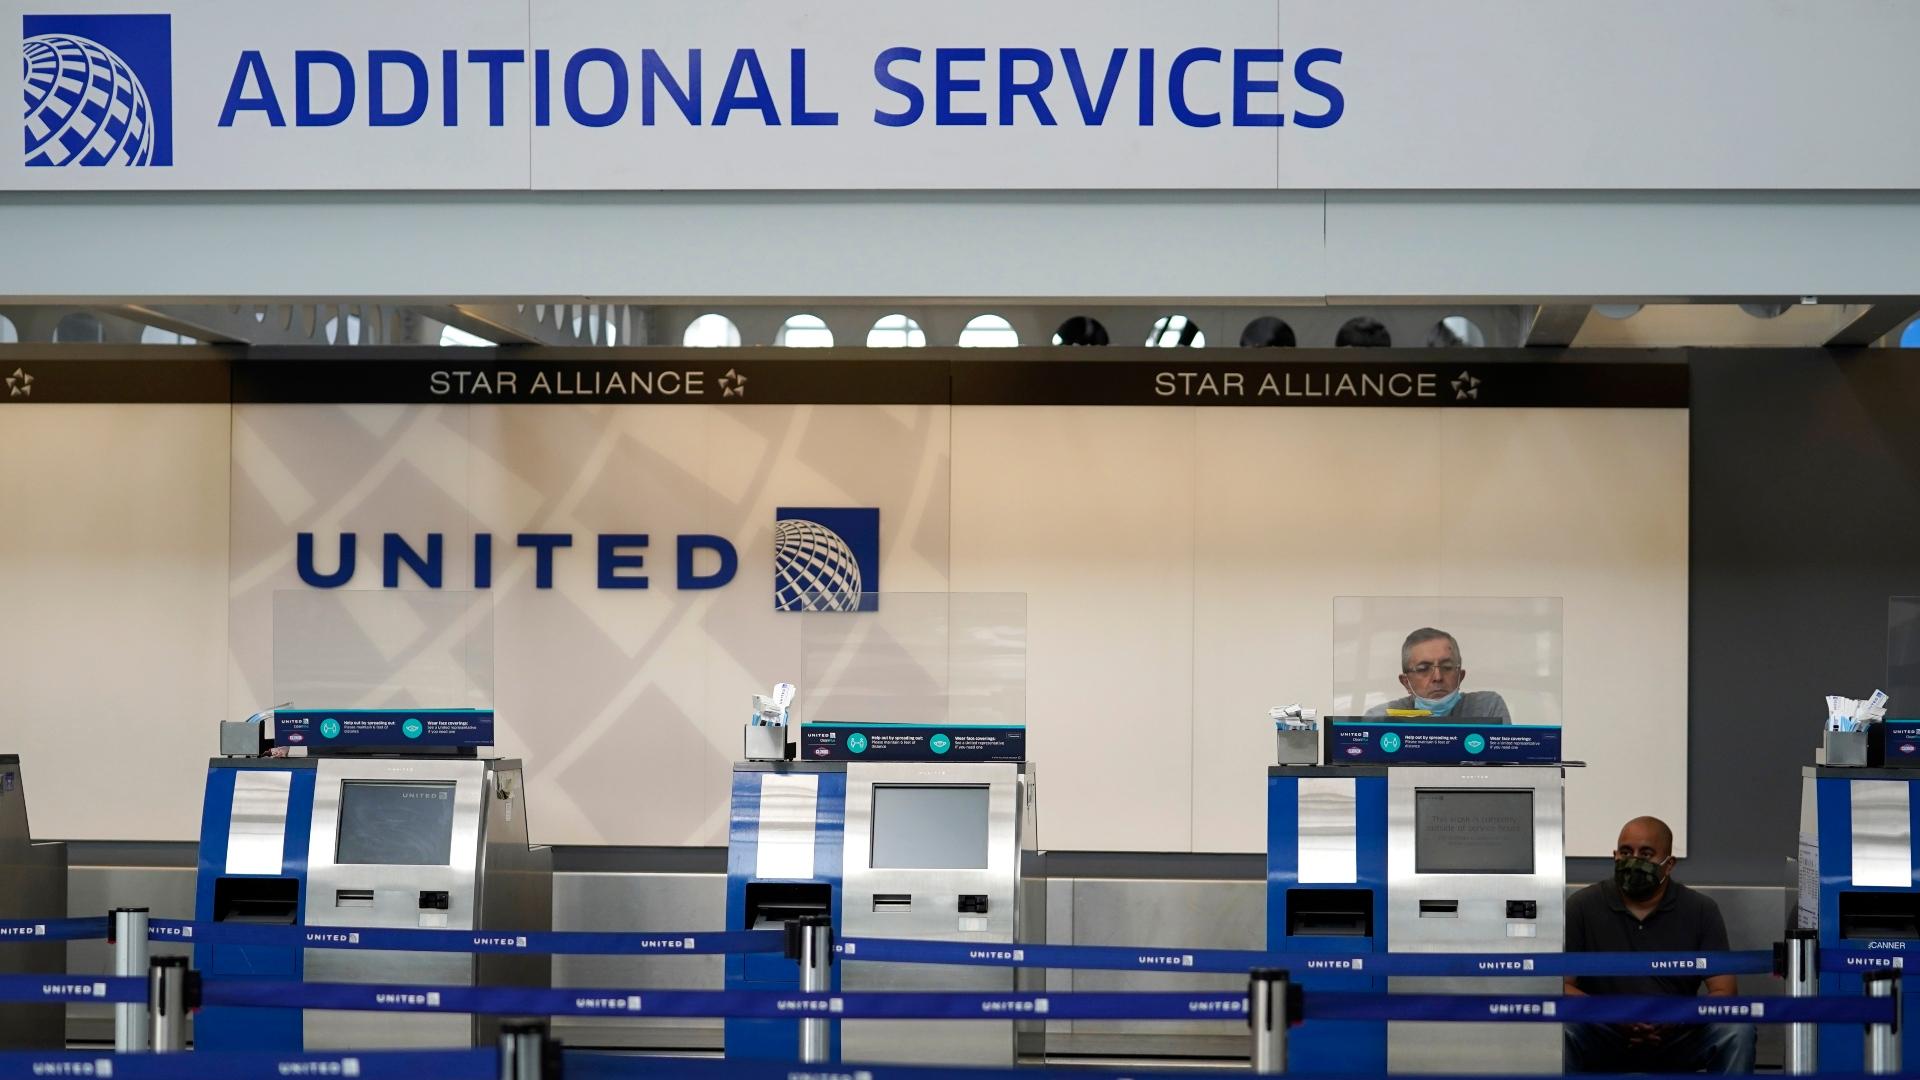 In this Oct. 14, 2020 file photo, United Airlines employees work at ticket counters in Terminal 1 at O'Hare International Airport in Chicago. (AP Photo / Nam Y. Huh, File)